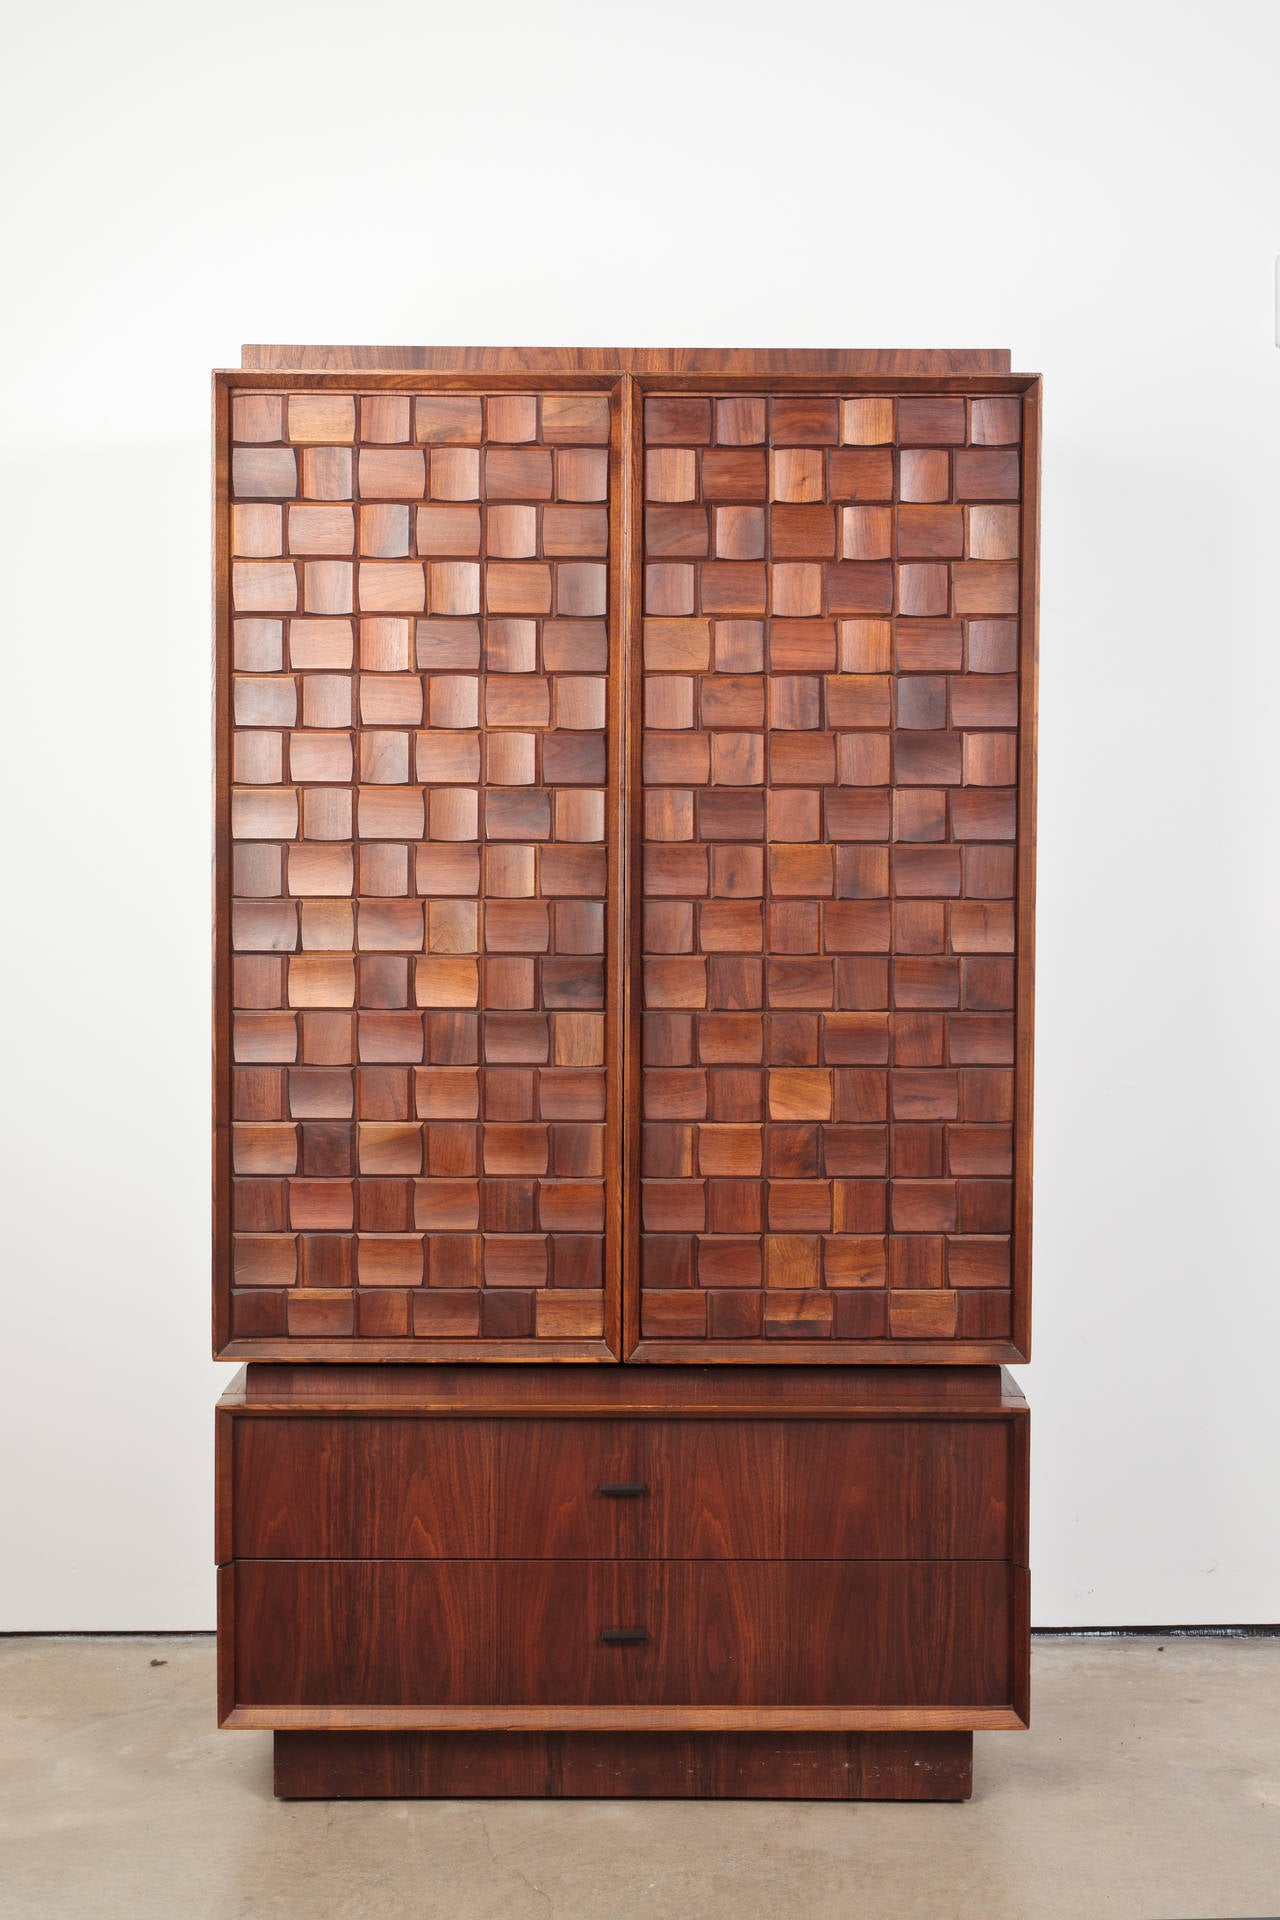 The detailing on this is exquisite. The cabinet and drawer faces have alternating vertical and horizontal wooden 